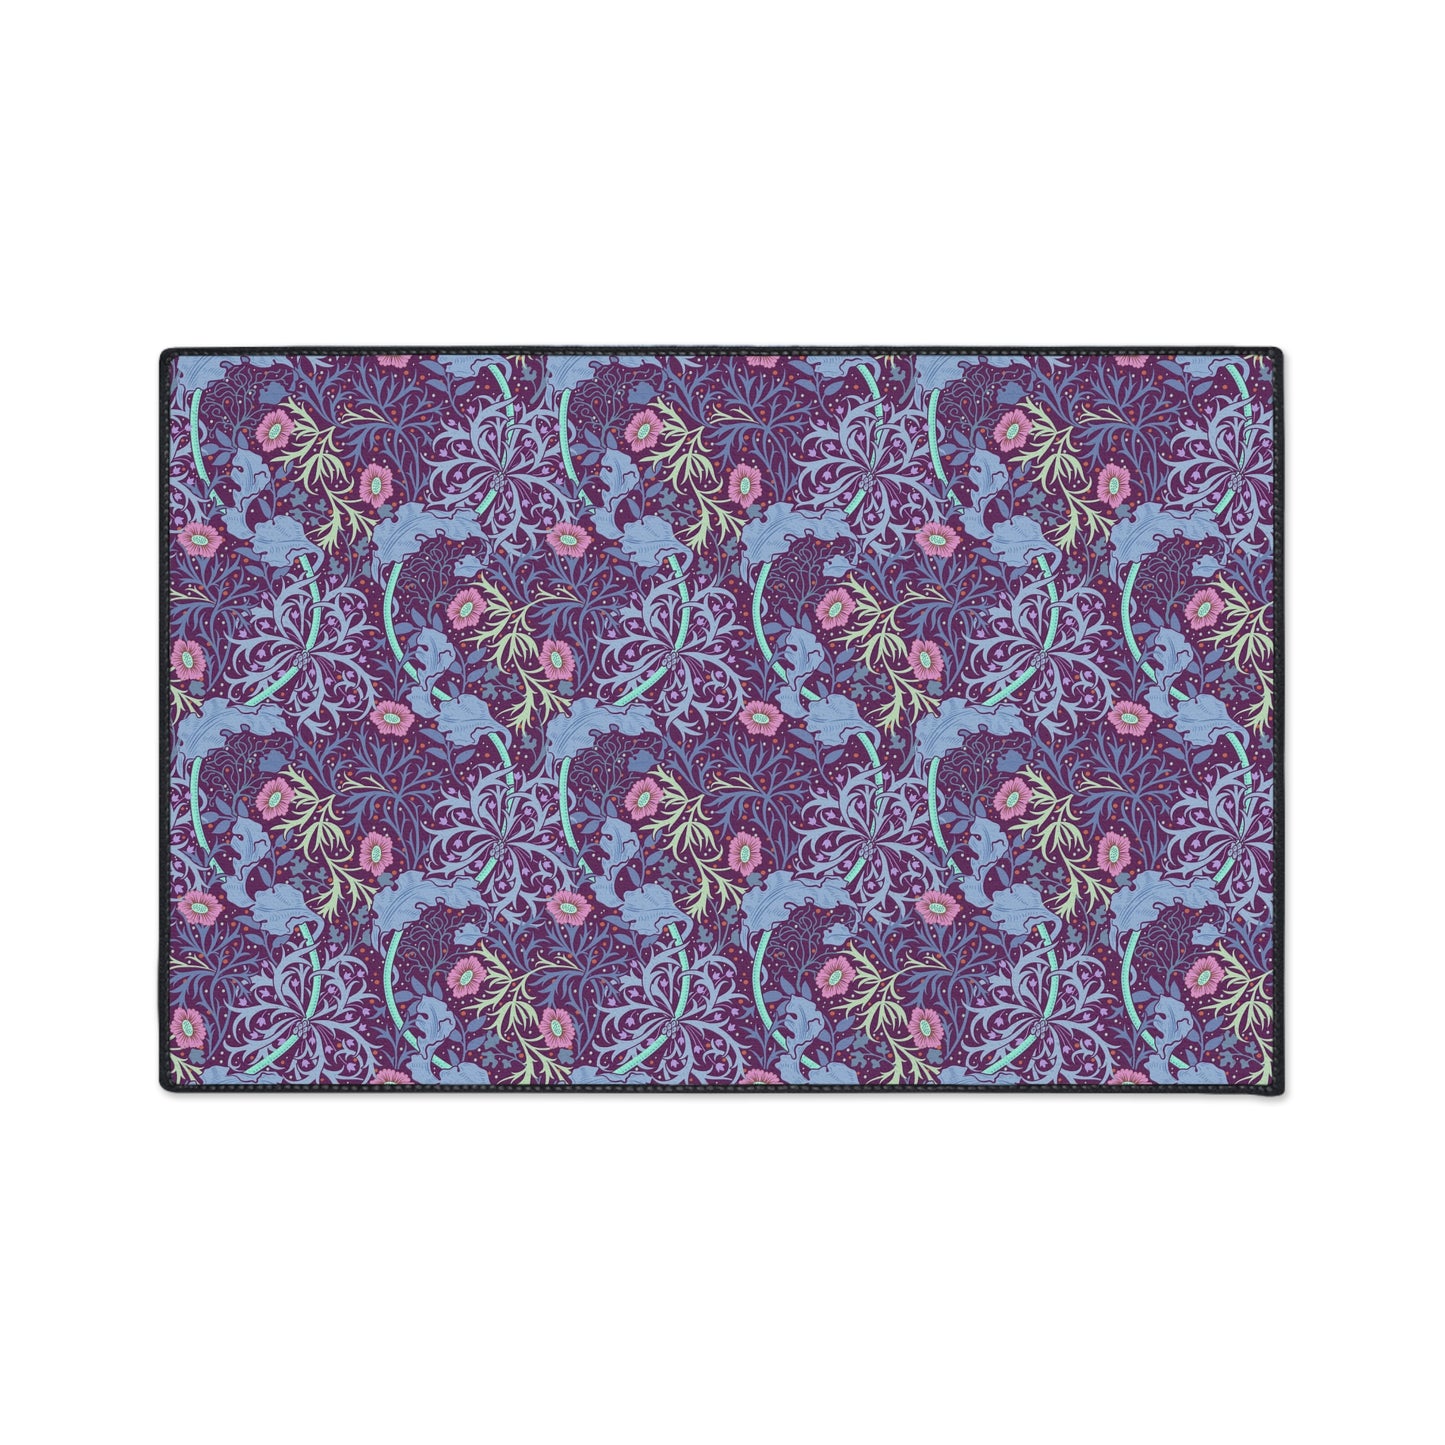 william-morris-co-heavy-duty-floor-mat-seaweed-collection-pink-flowers-3